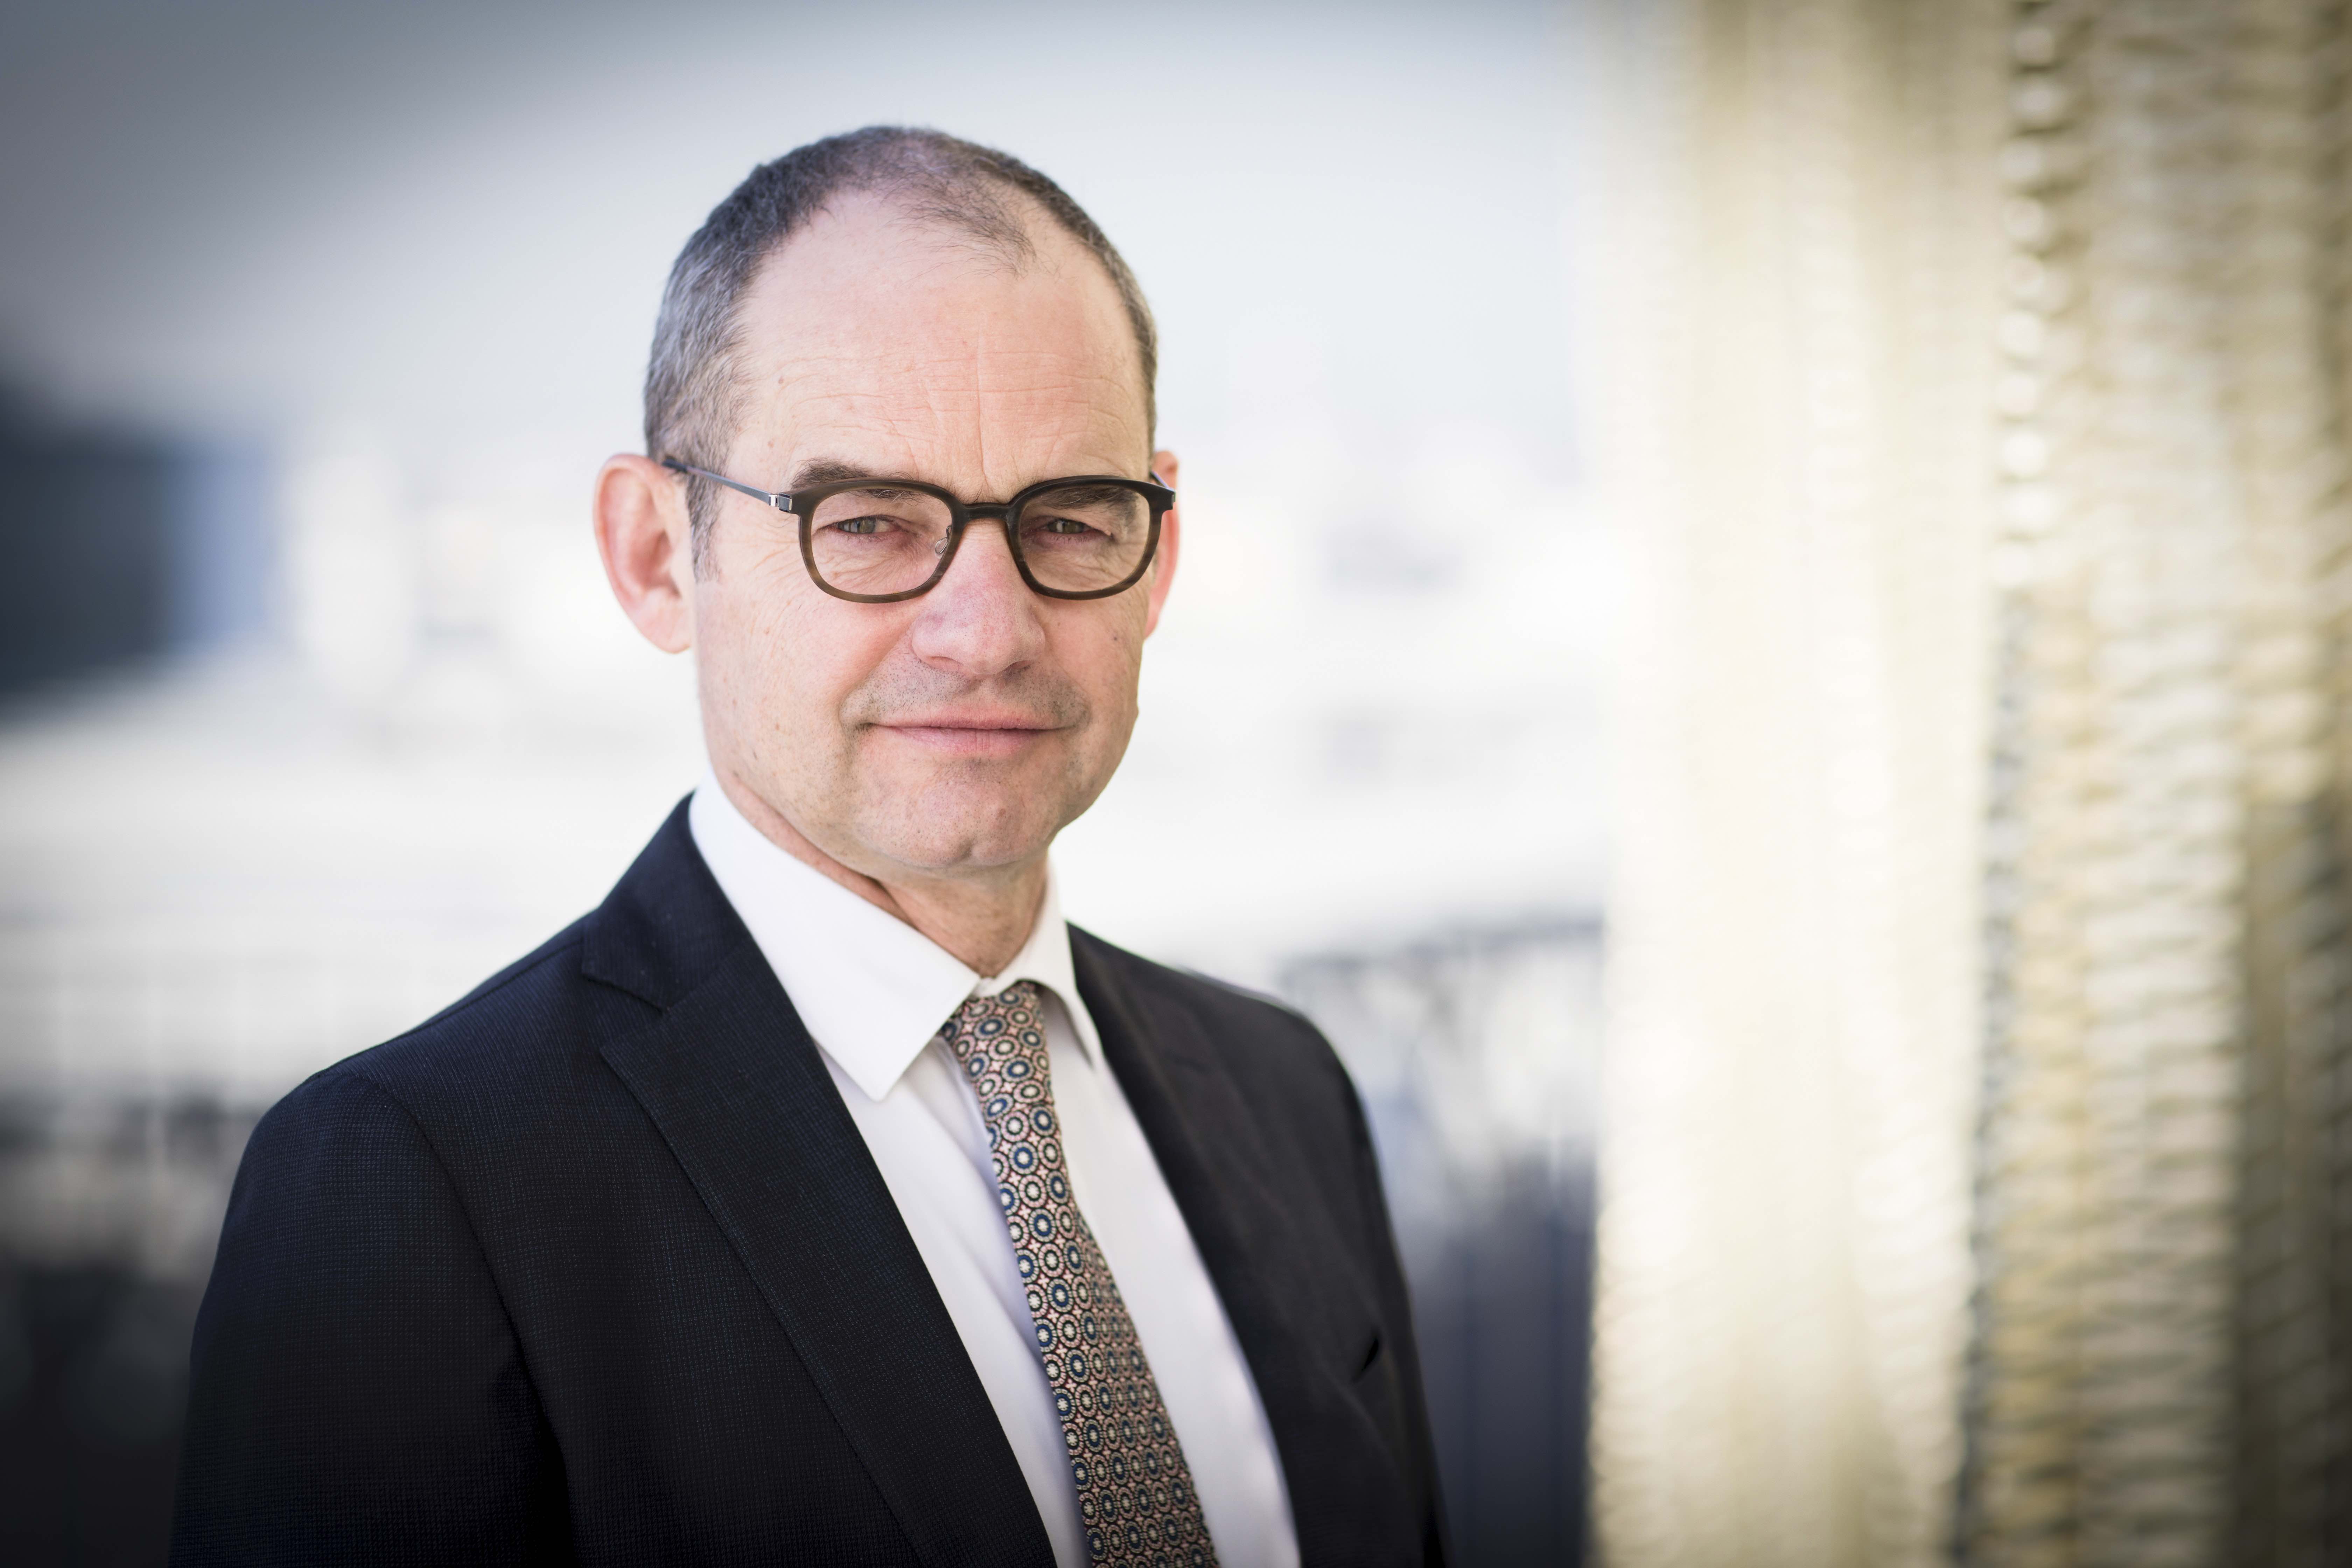 Patrick Jeantet appointed as chairman of Keolis Group